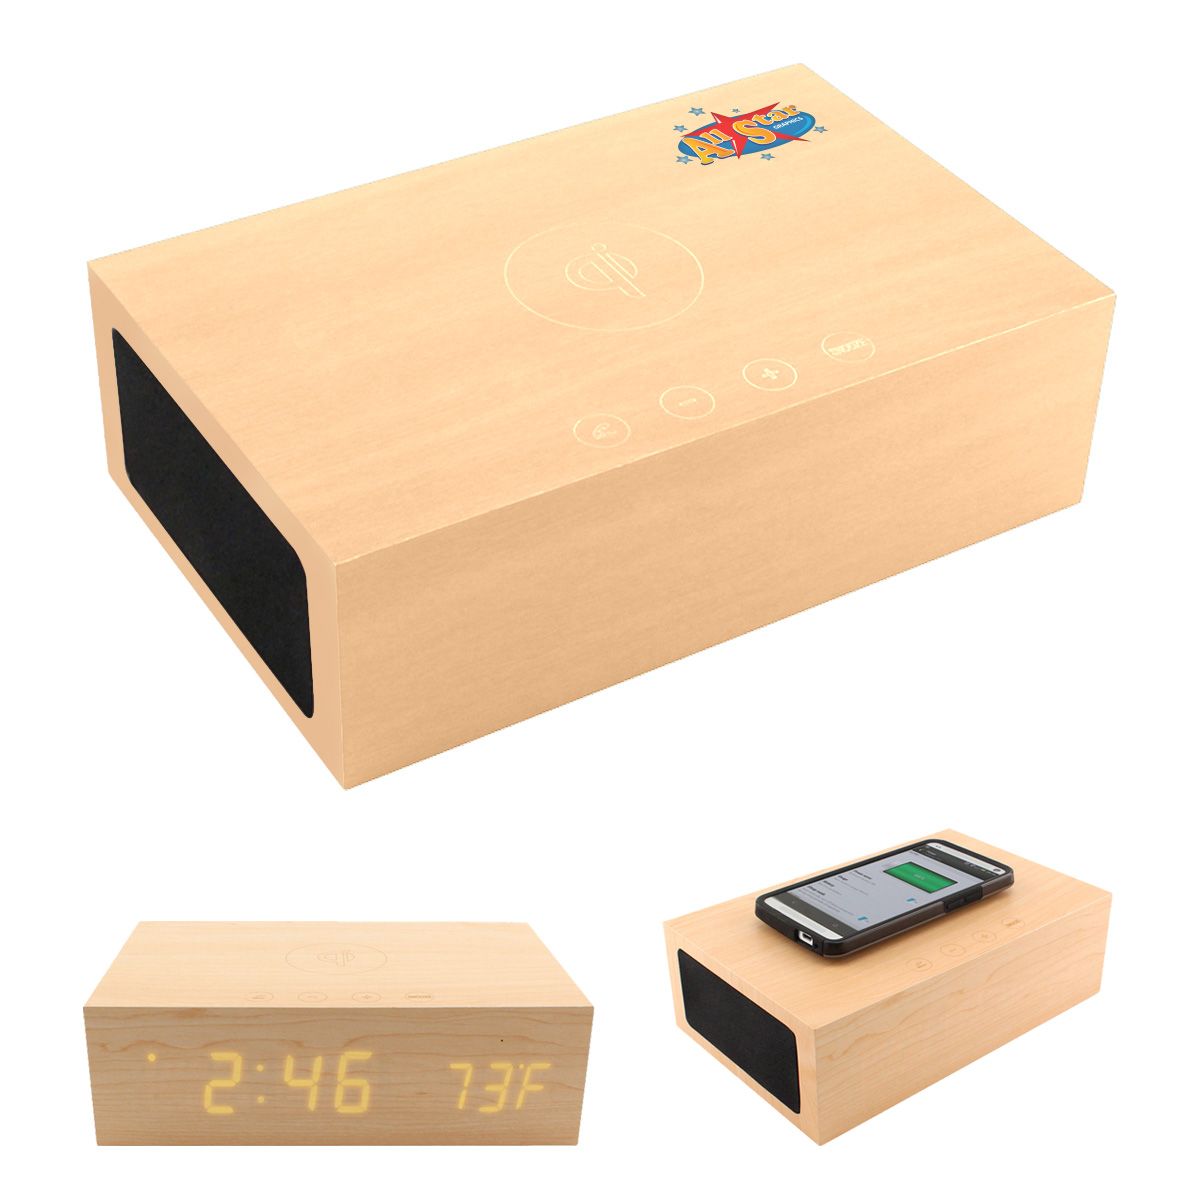 Alarm Clock With Qi Charging Station And Wireless Speaker